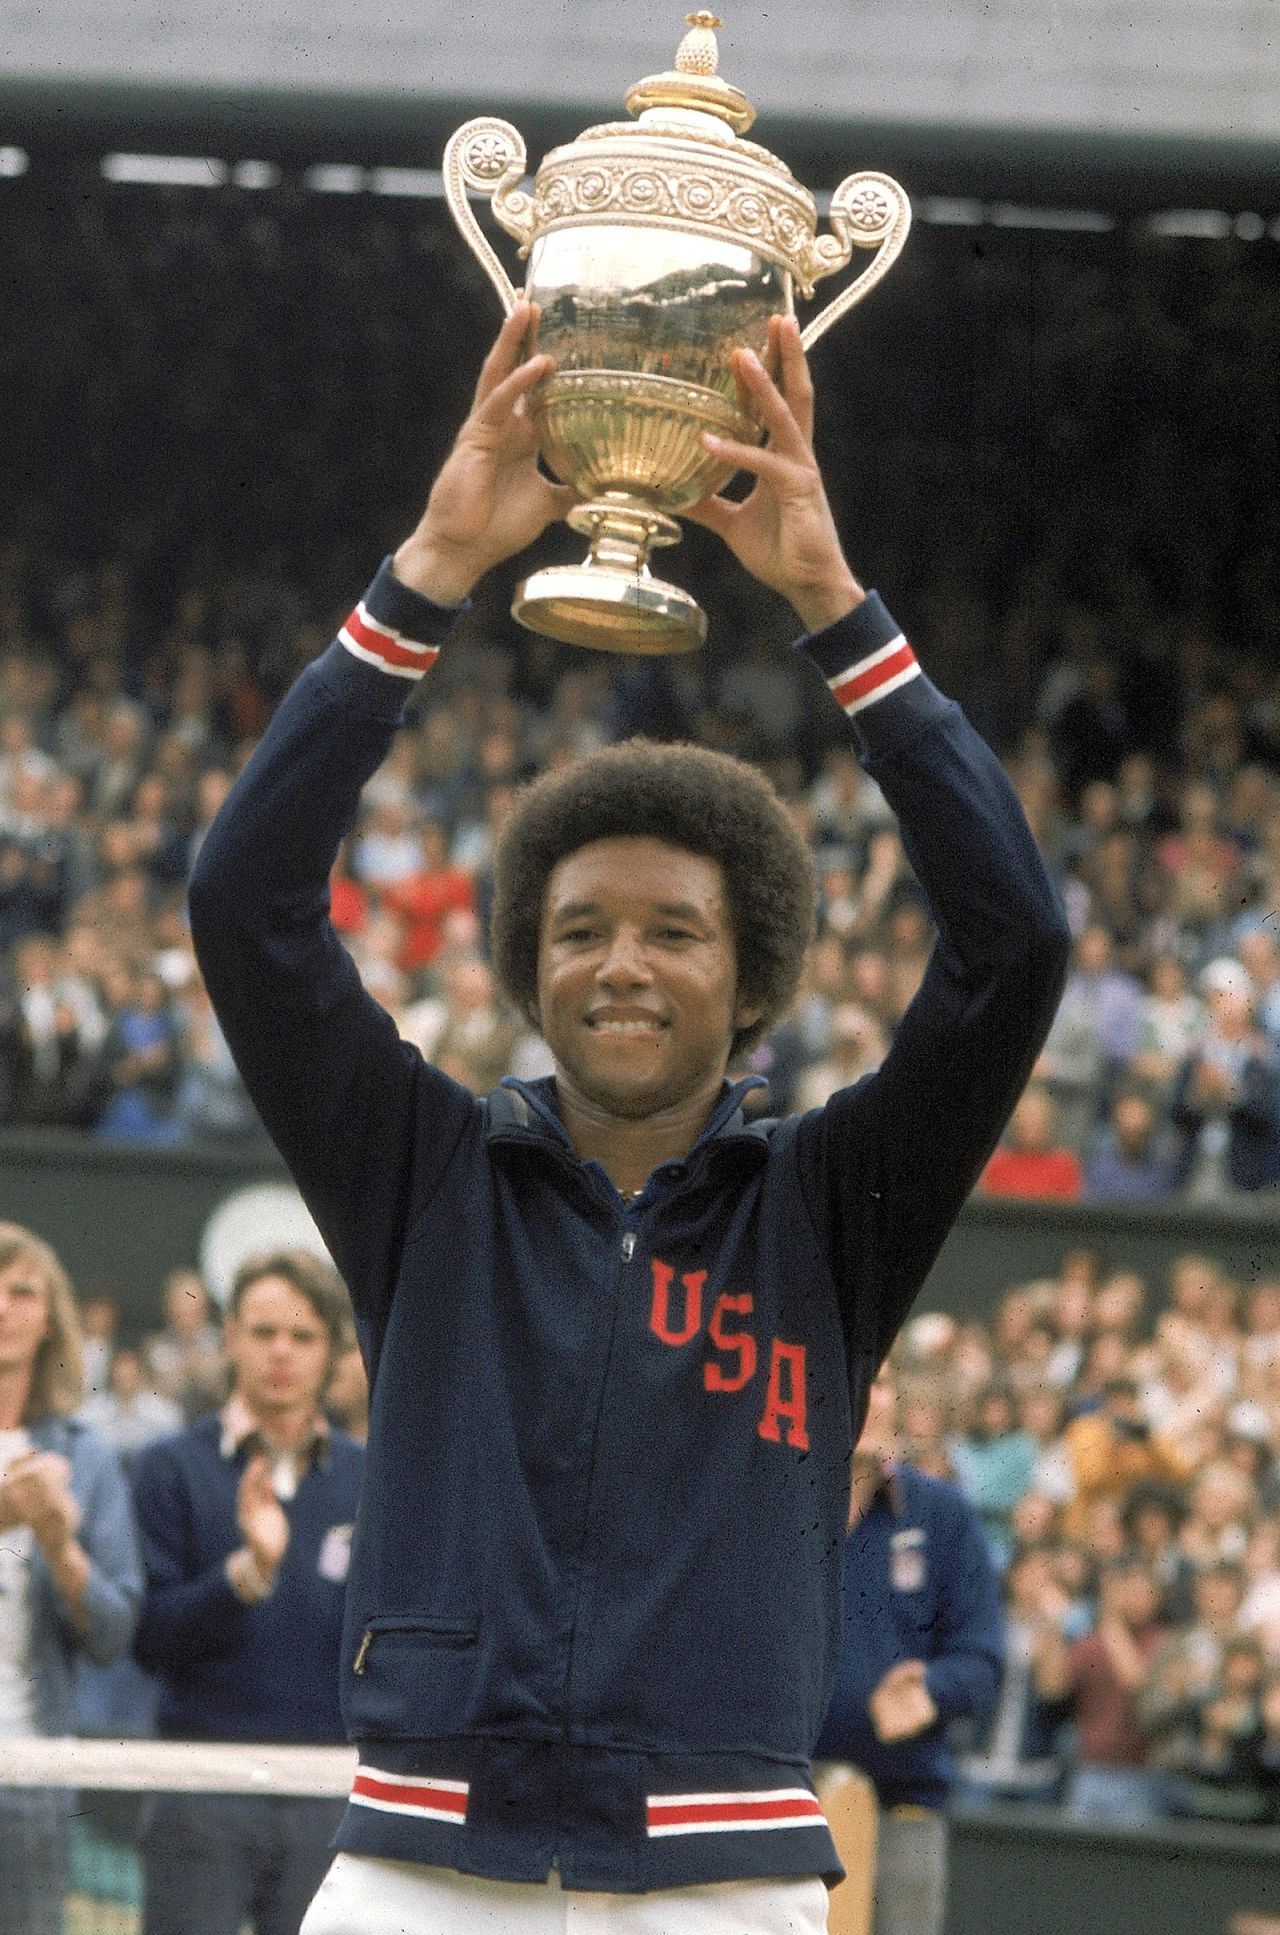 Tennis: Wimbledon: USA Arthur Ashe victorious with trophy after winning Finals match vs USA Jimmy Connors at All England Club.
London, England 7/7/1975
CREDIT: Tony Triolo (Photo by Tony Triolo /Sports Illustrated via Getty Images)
(Set Number: X19662 )